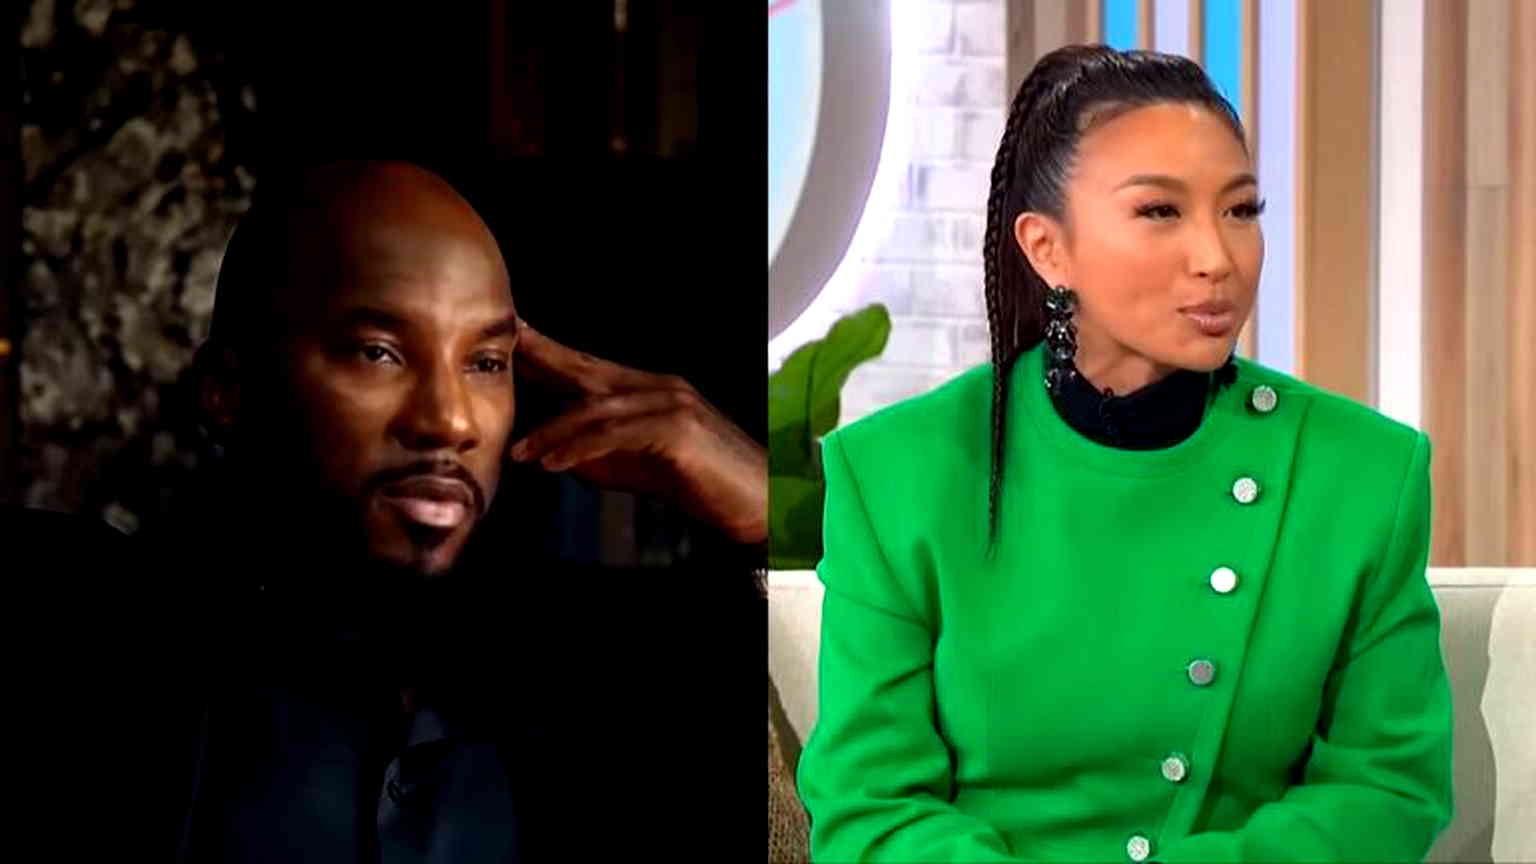 Jeannie Mai and Jeezy’s divorce intensifies in new court filings focused on child custody